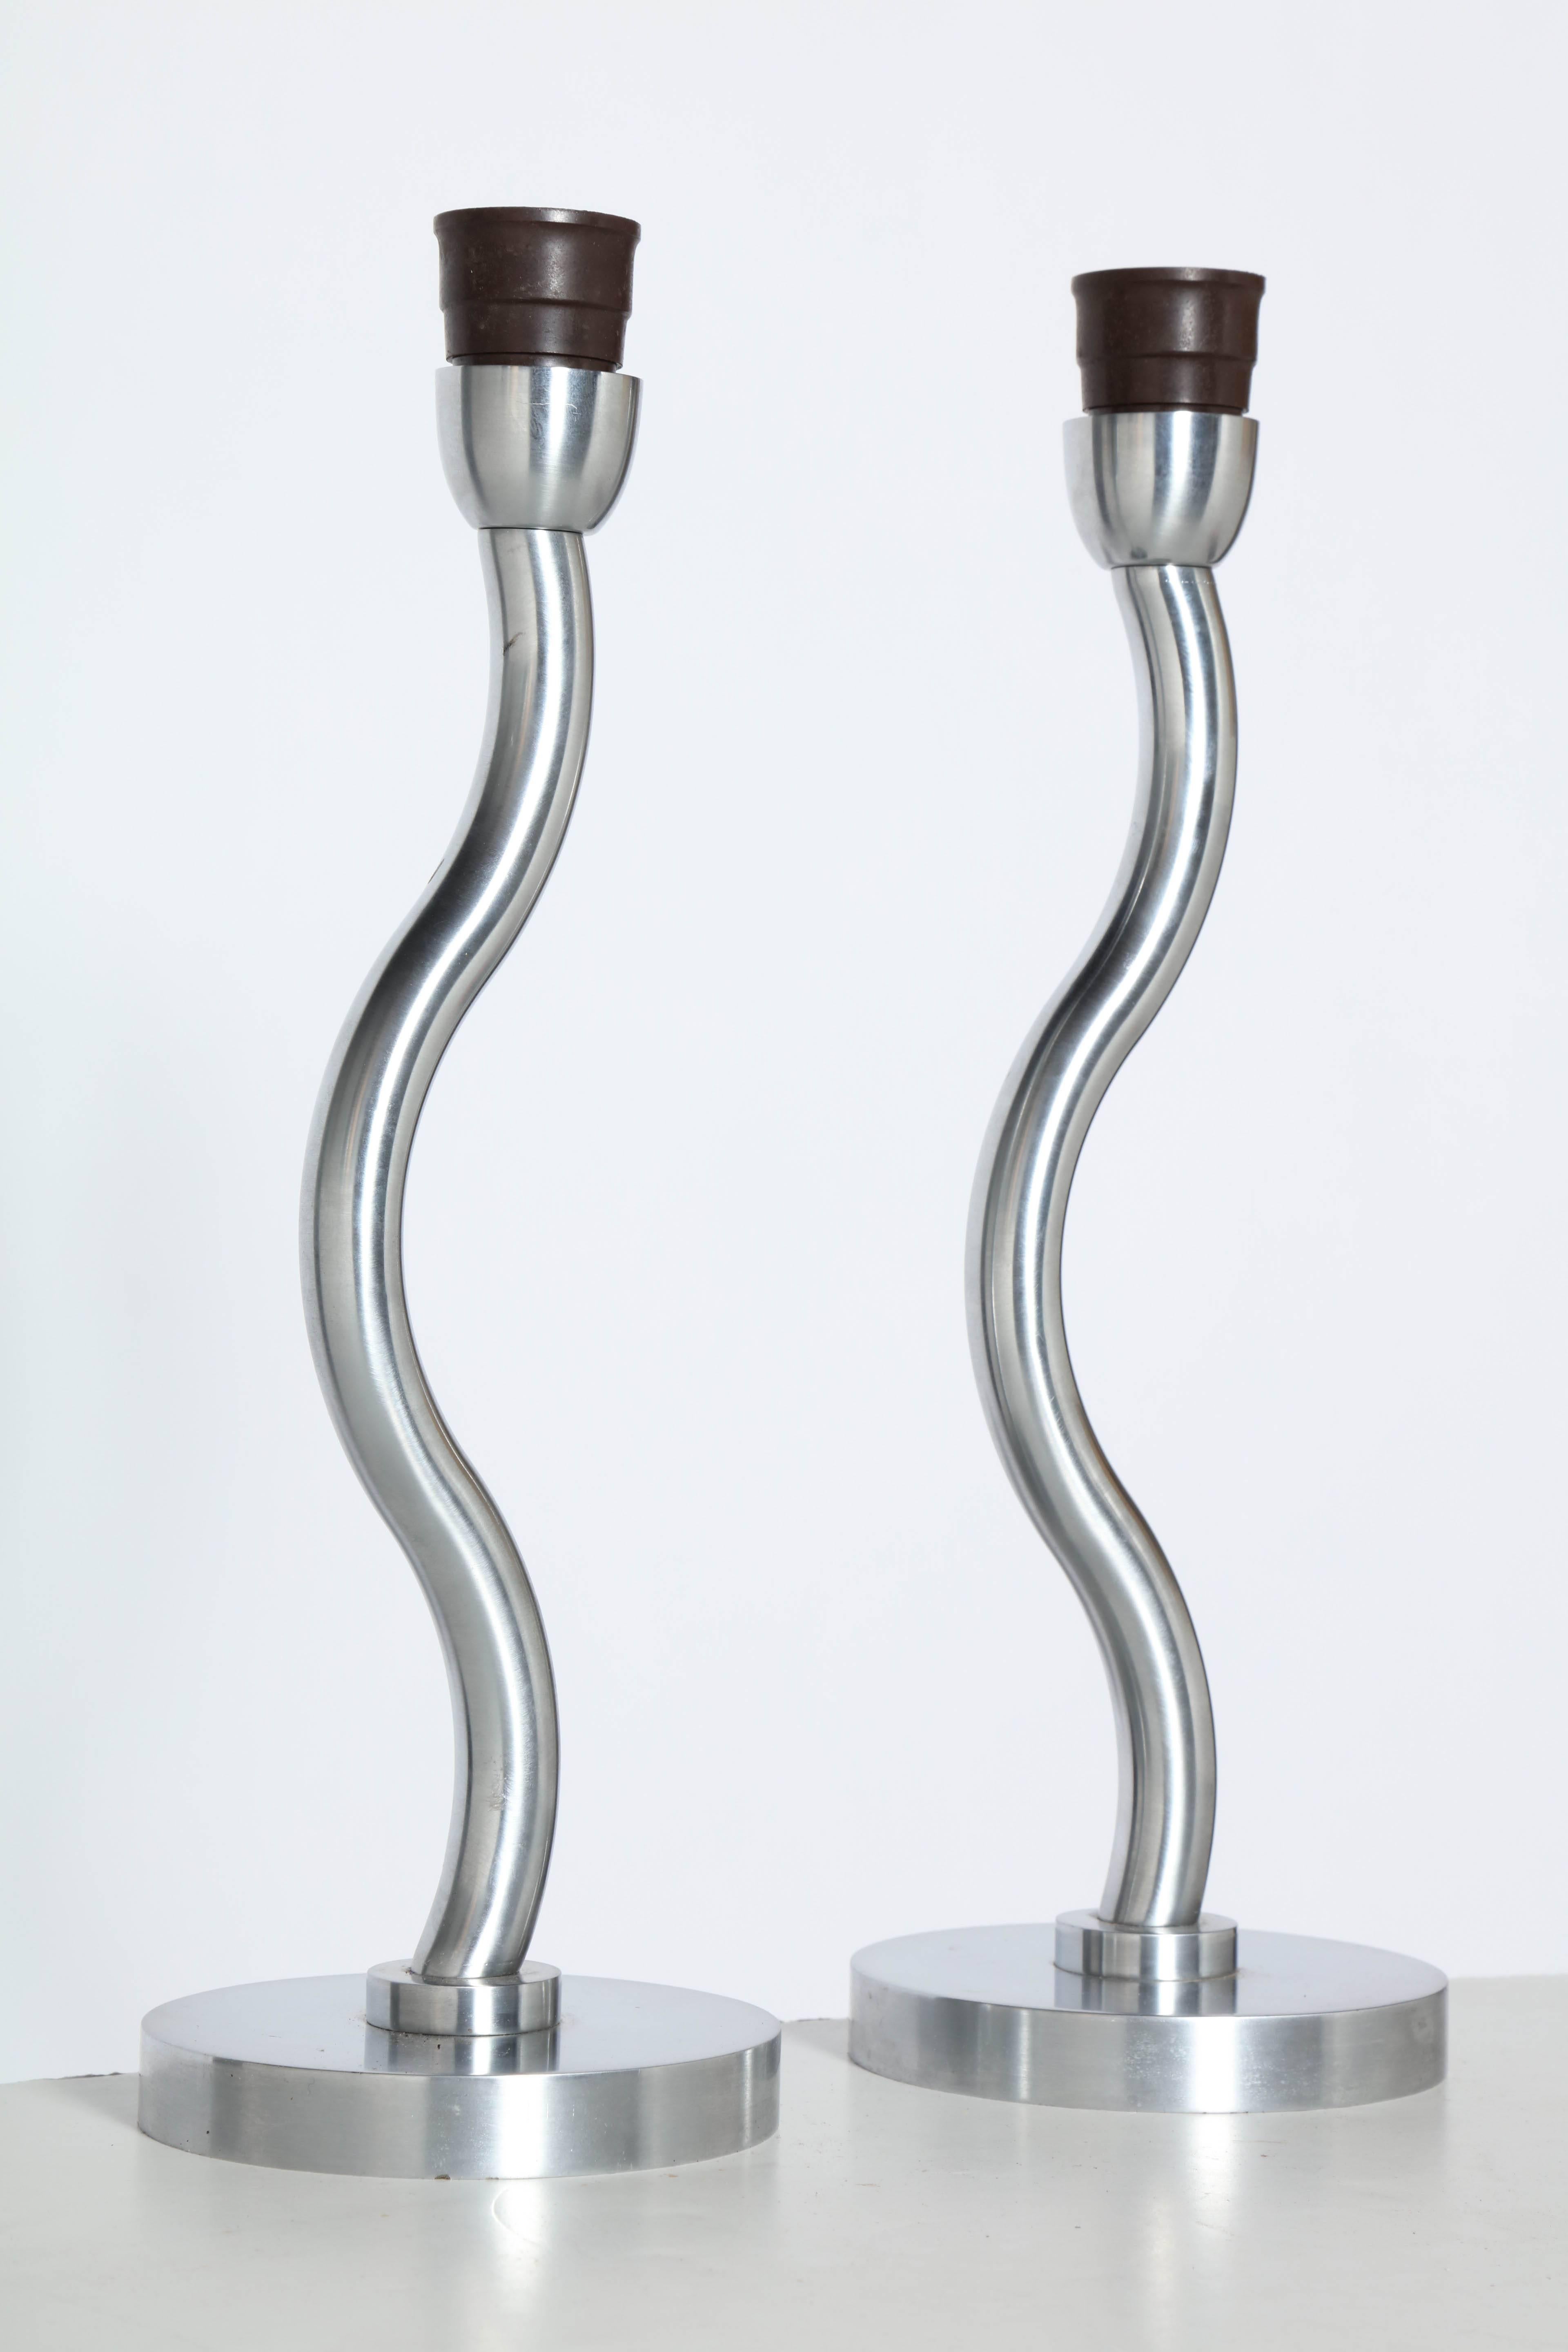 Pair Fine European Machined Brushed Steel Reading Desk Lamps, 1980's. Featuring a snake like design on round base. Heavy. Curvaceous. Sculptural. Handsome. Rarity. Small footprint. Entryway. Foyer. Mantel. Kitchen. Made in Europe. Rewired with Black